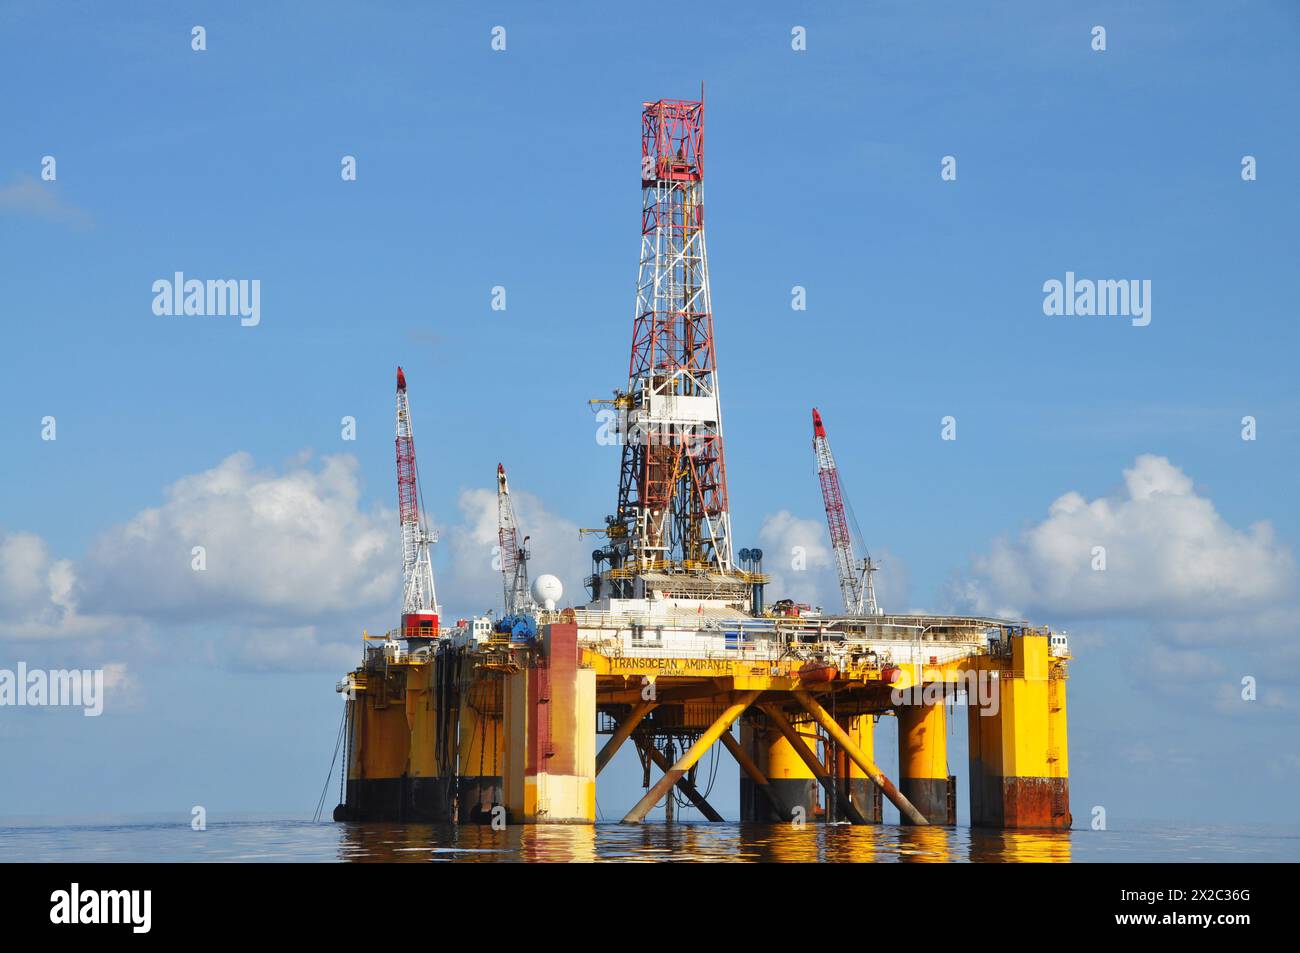 Transocean Amirante deep water floating offshore oil and gas drilling platform in the Gulf of Mexico off the coast of Louisiana. Stock Photo